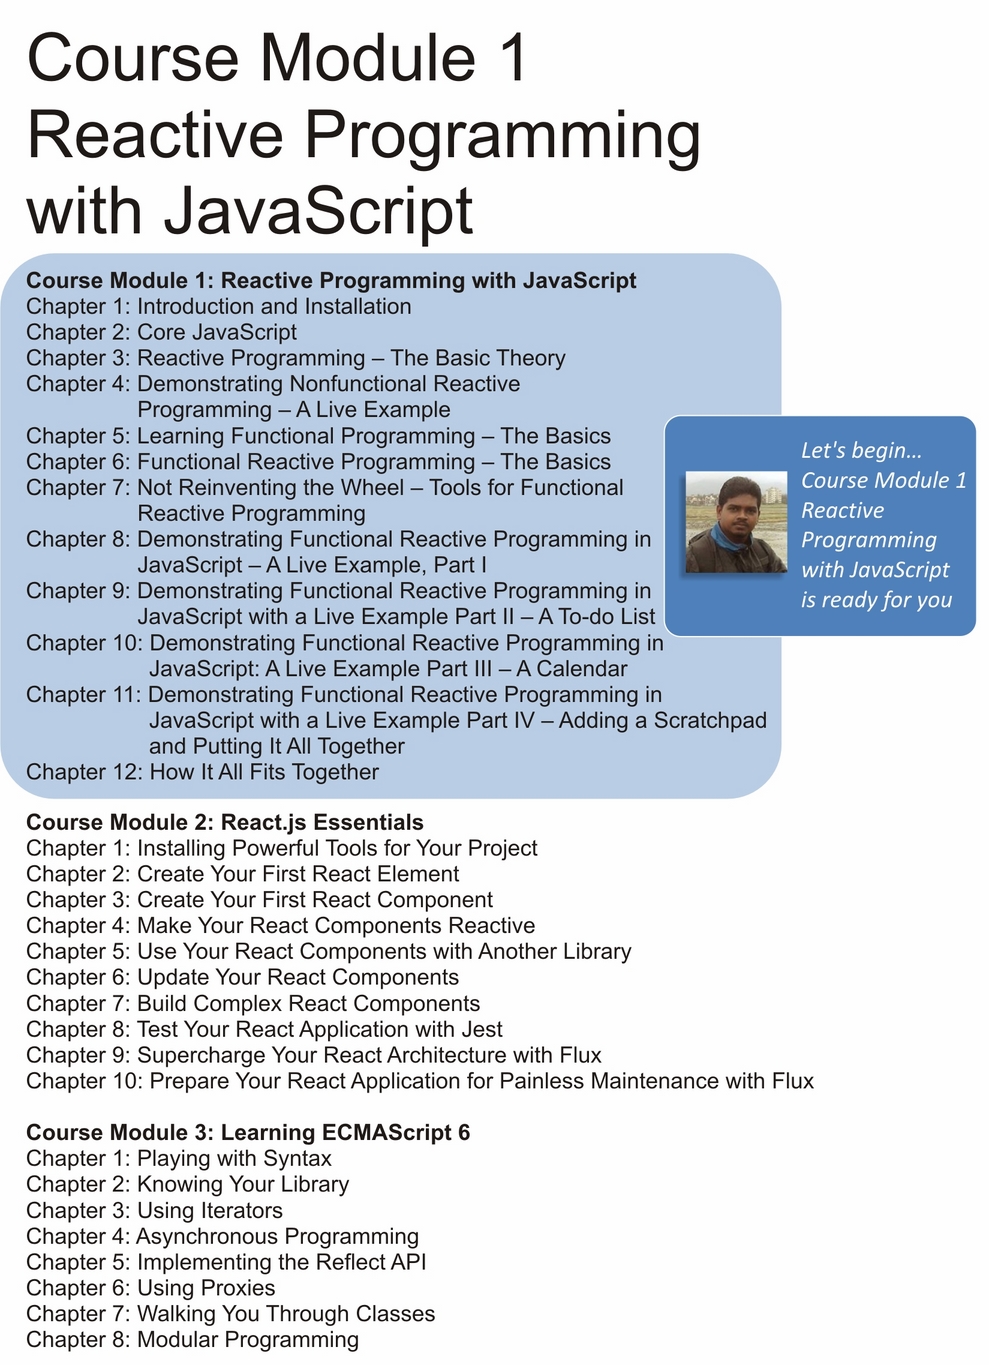 Course Module 1: Reactive Programming with JavaScript